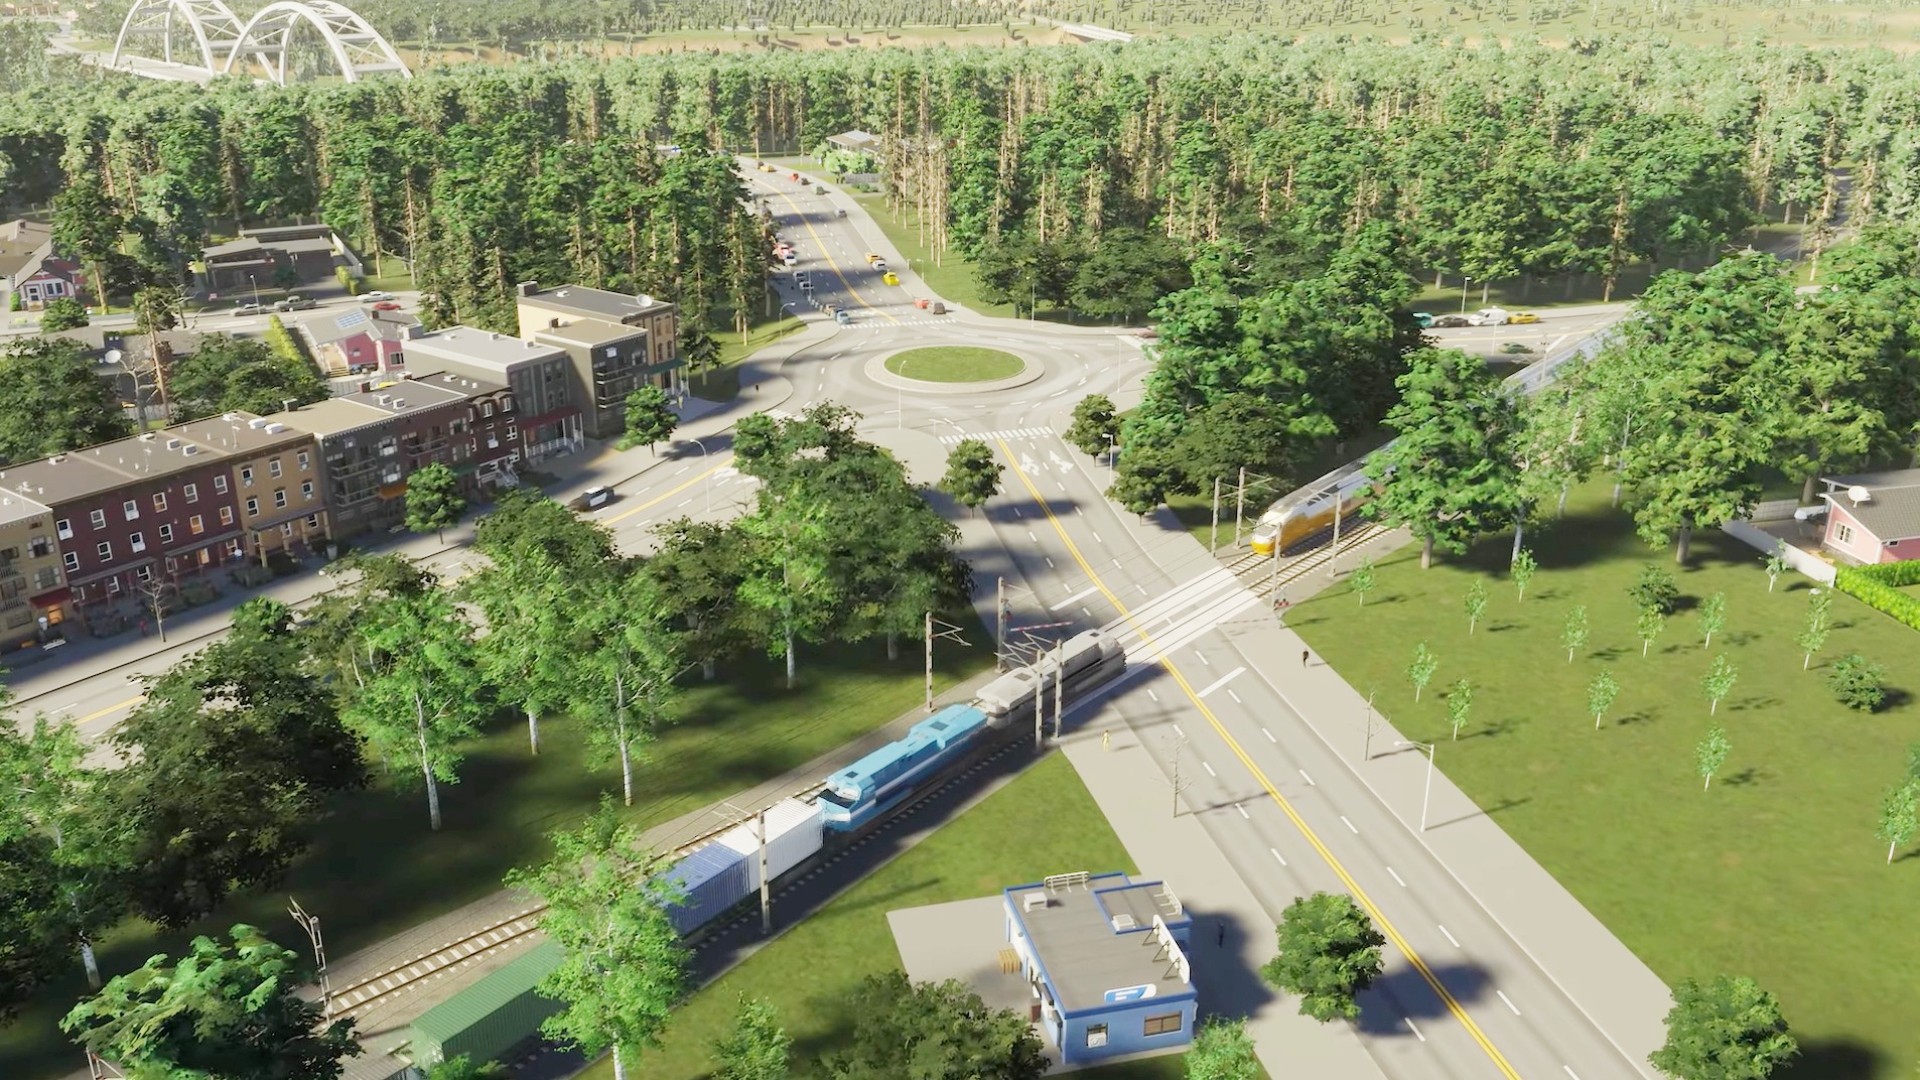 Cities Skylines 2 mixed zoning is confirmed, delivering ultra realism